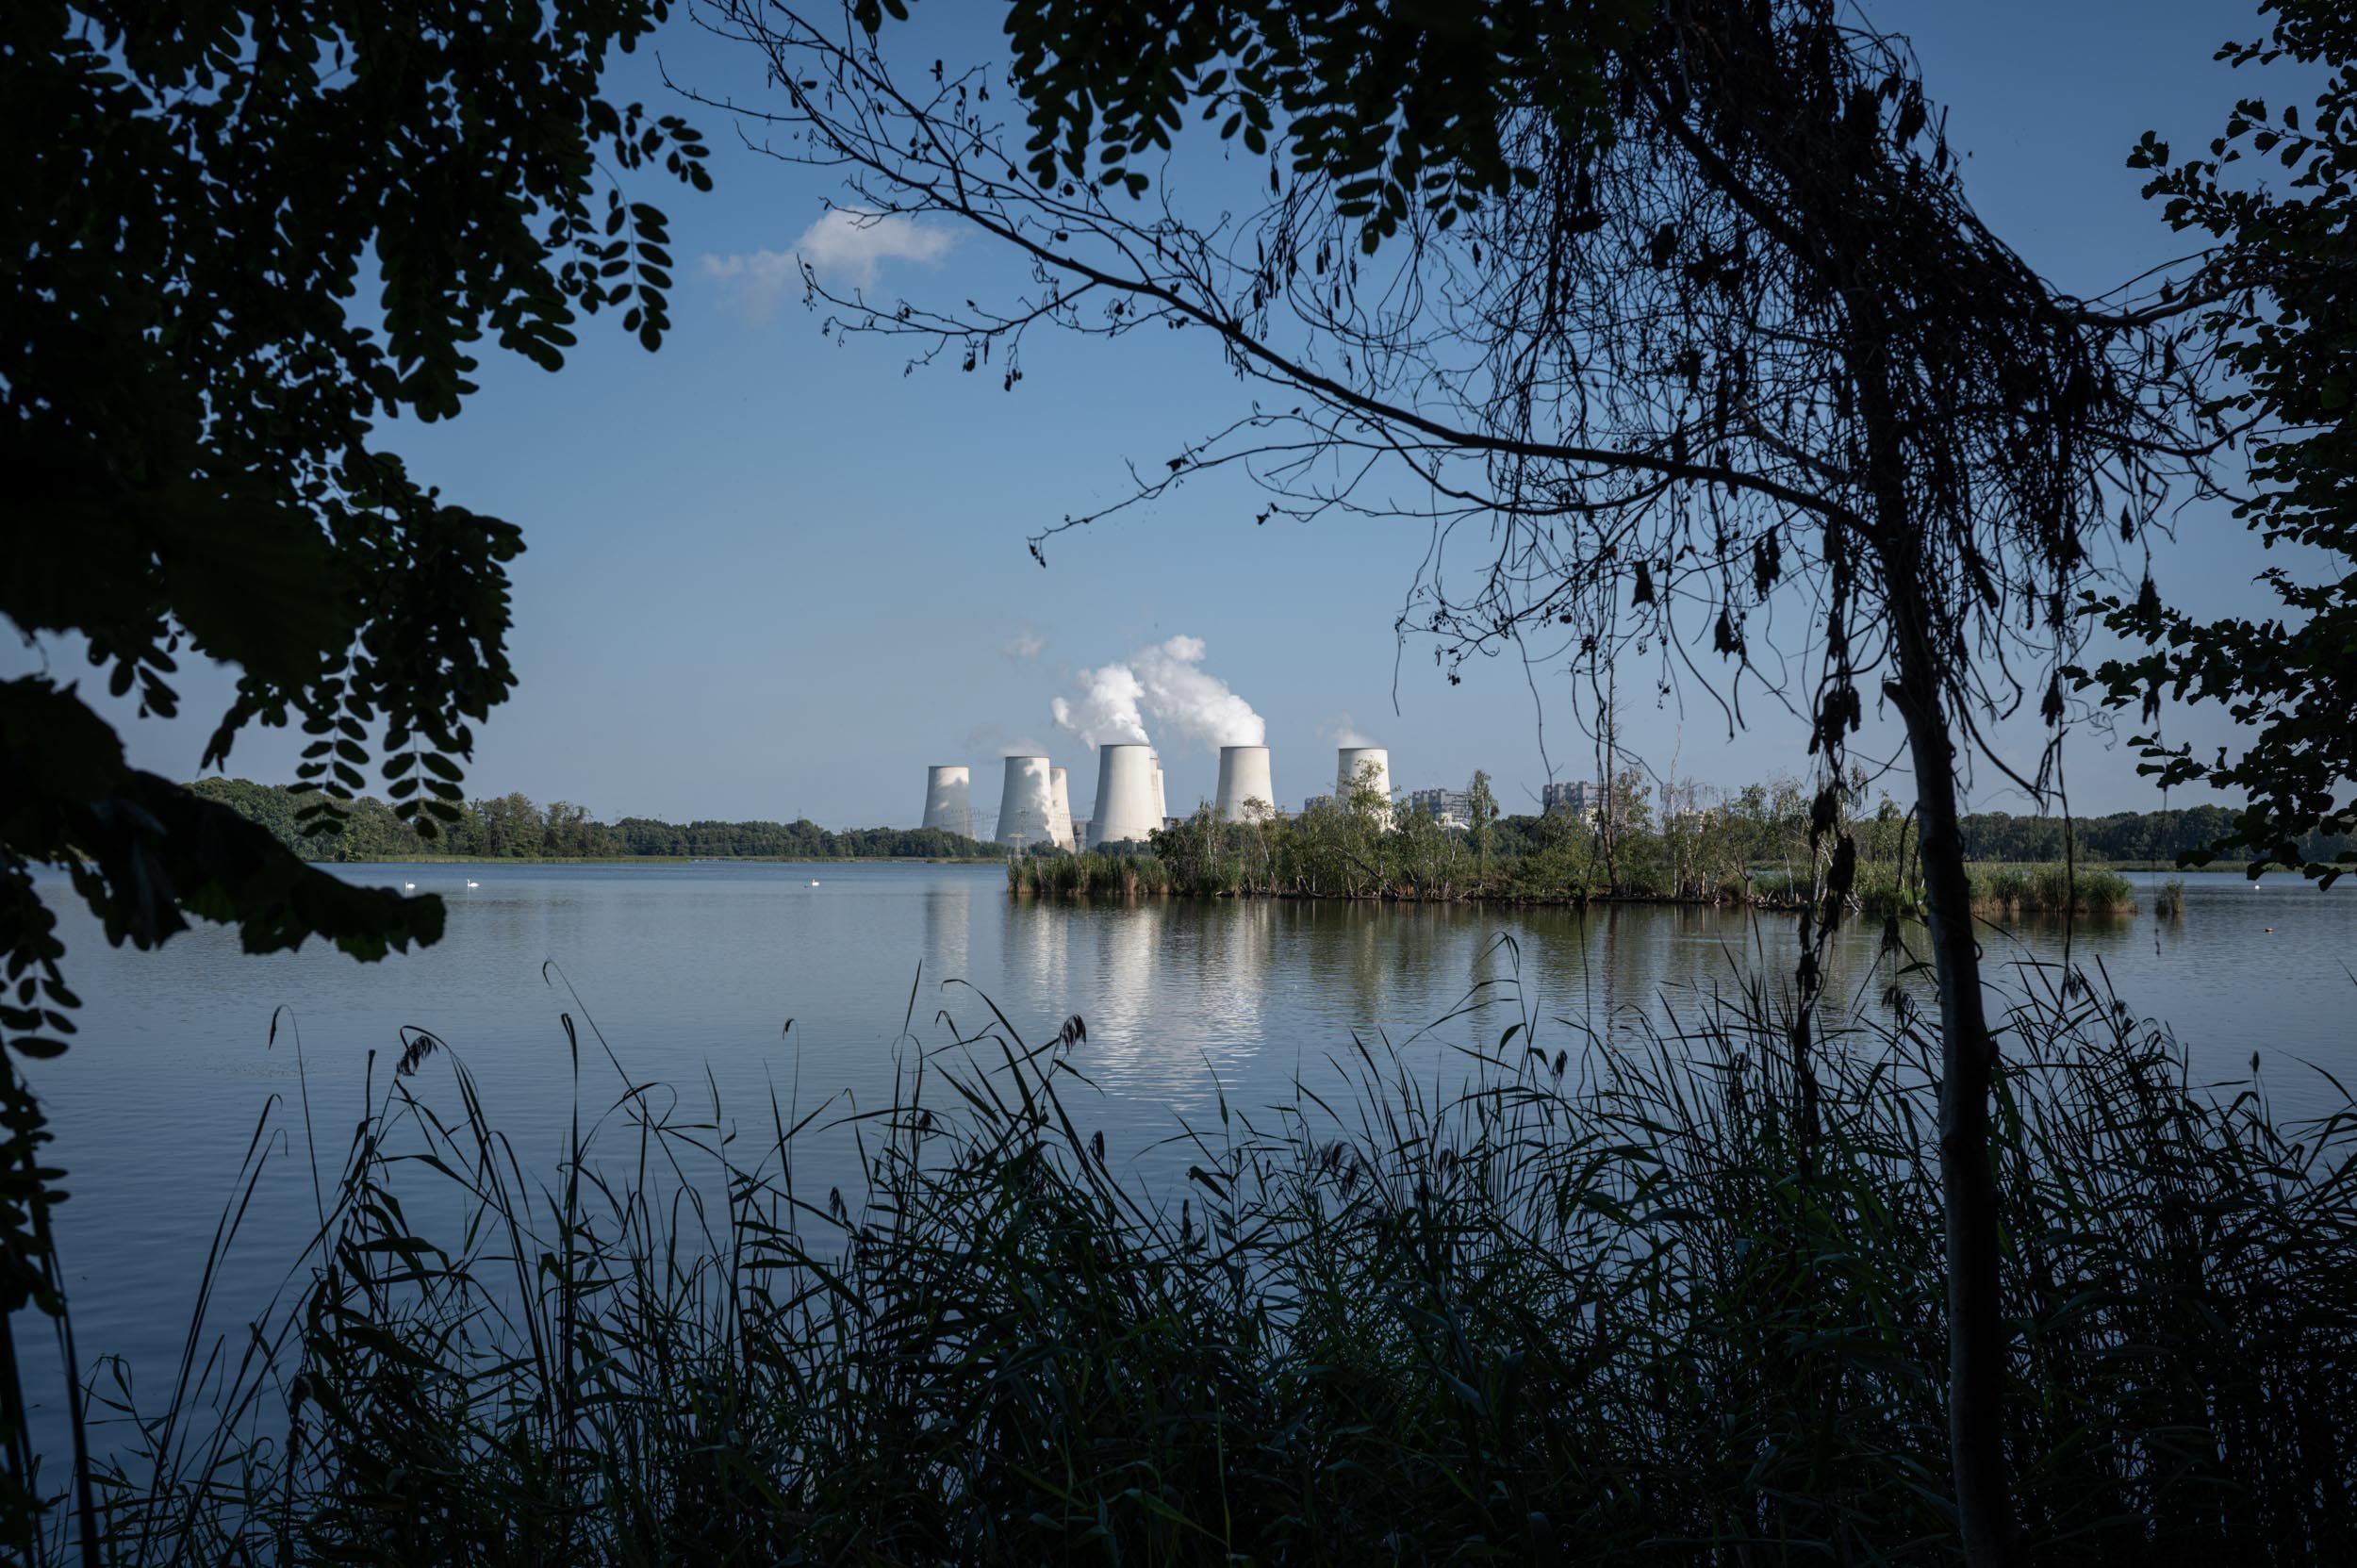  A coal power plant, which will be shut down by 2028, in the eastern village of Jänschwalde. 